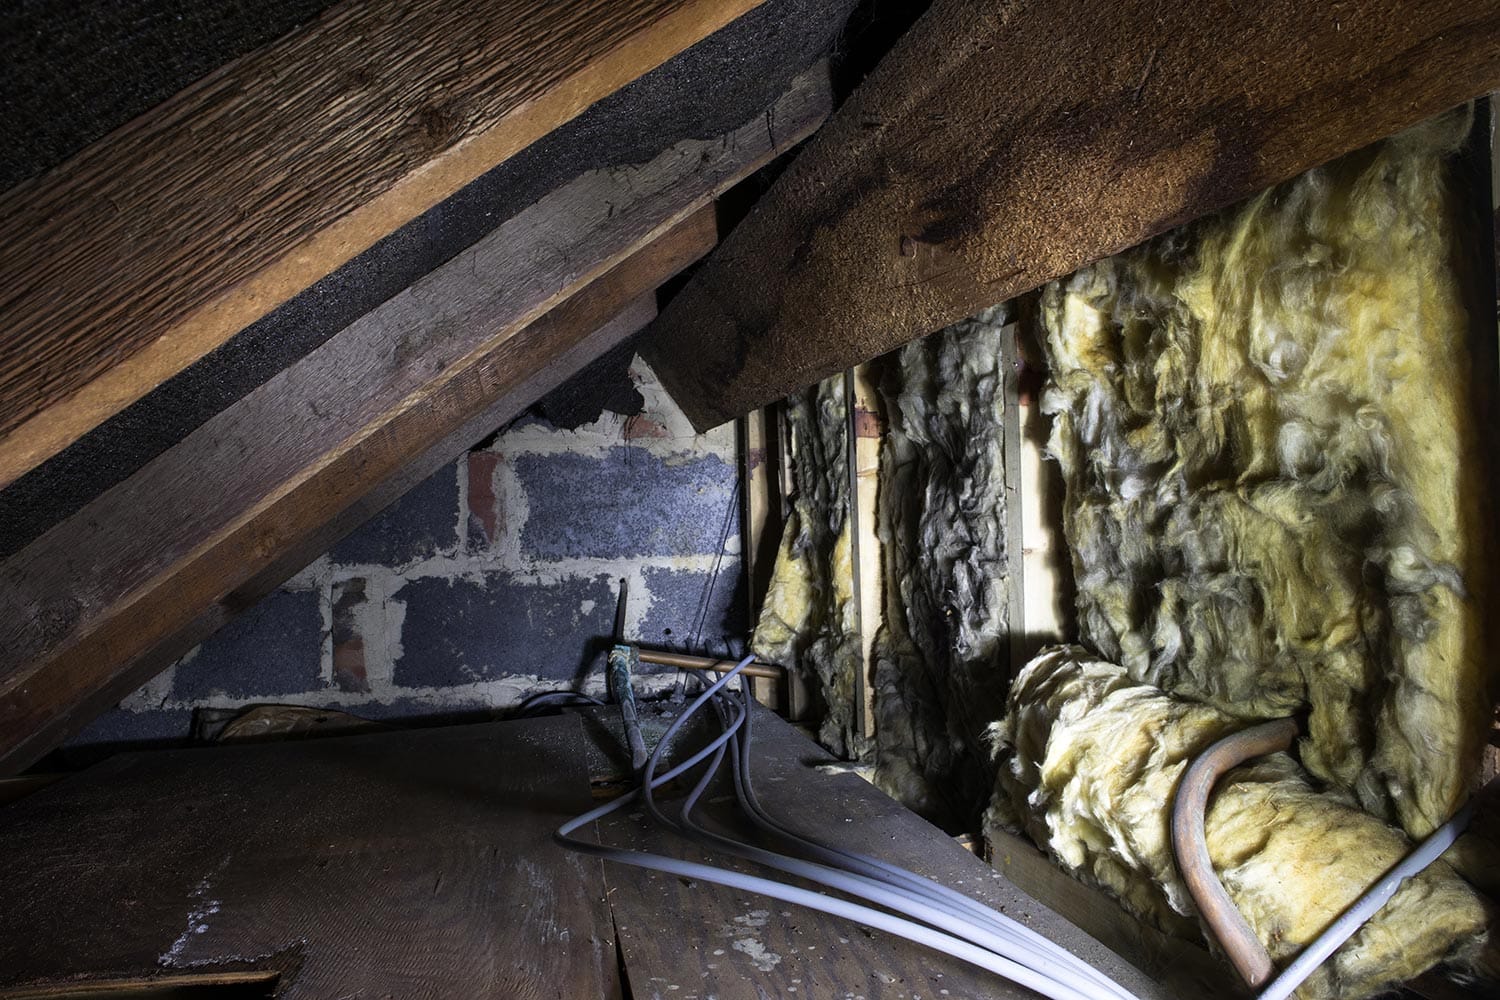 Crawl space under the eves of a house showing old fibreglass insulation